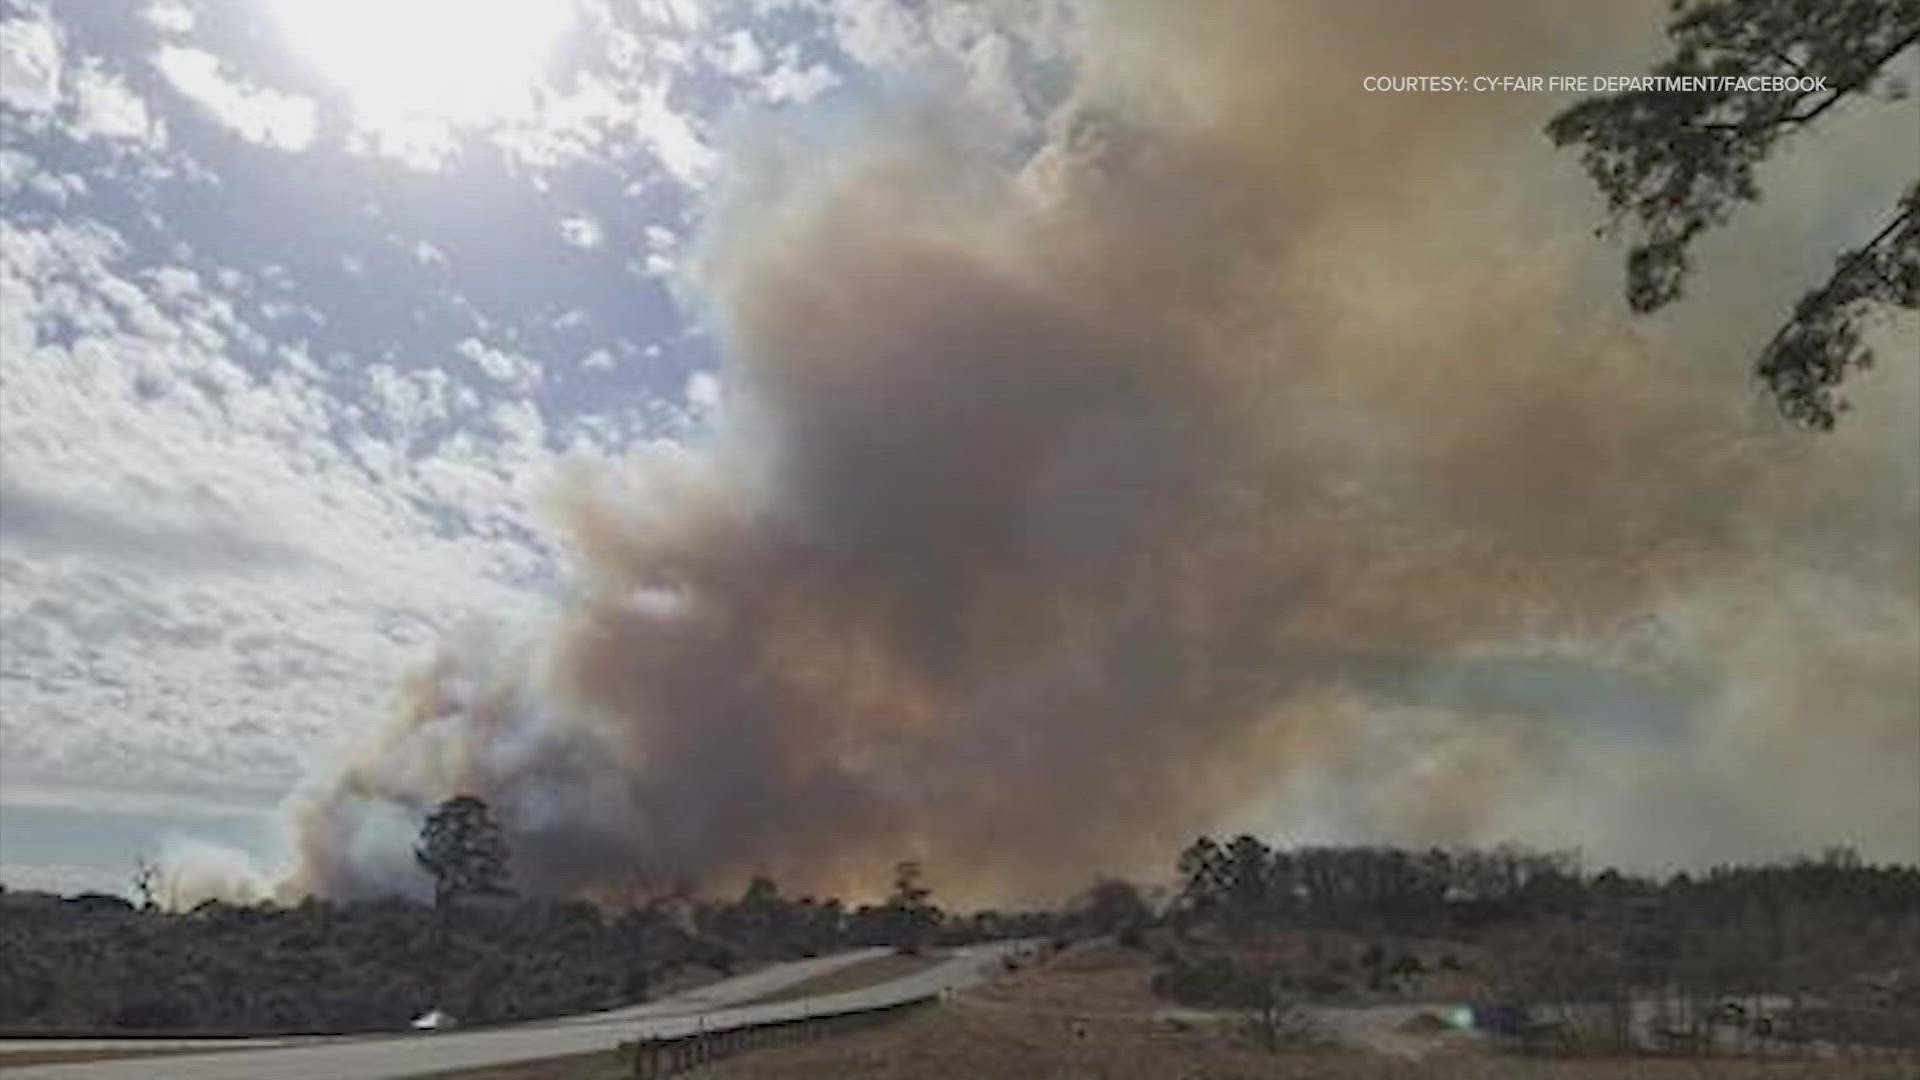 As of 1 p.m. Wednesday, officials reported that fire was 30% contained. They say there's no threat of it crossing containment.